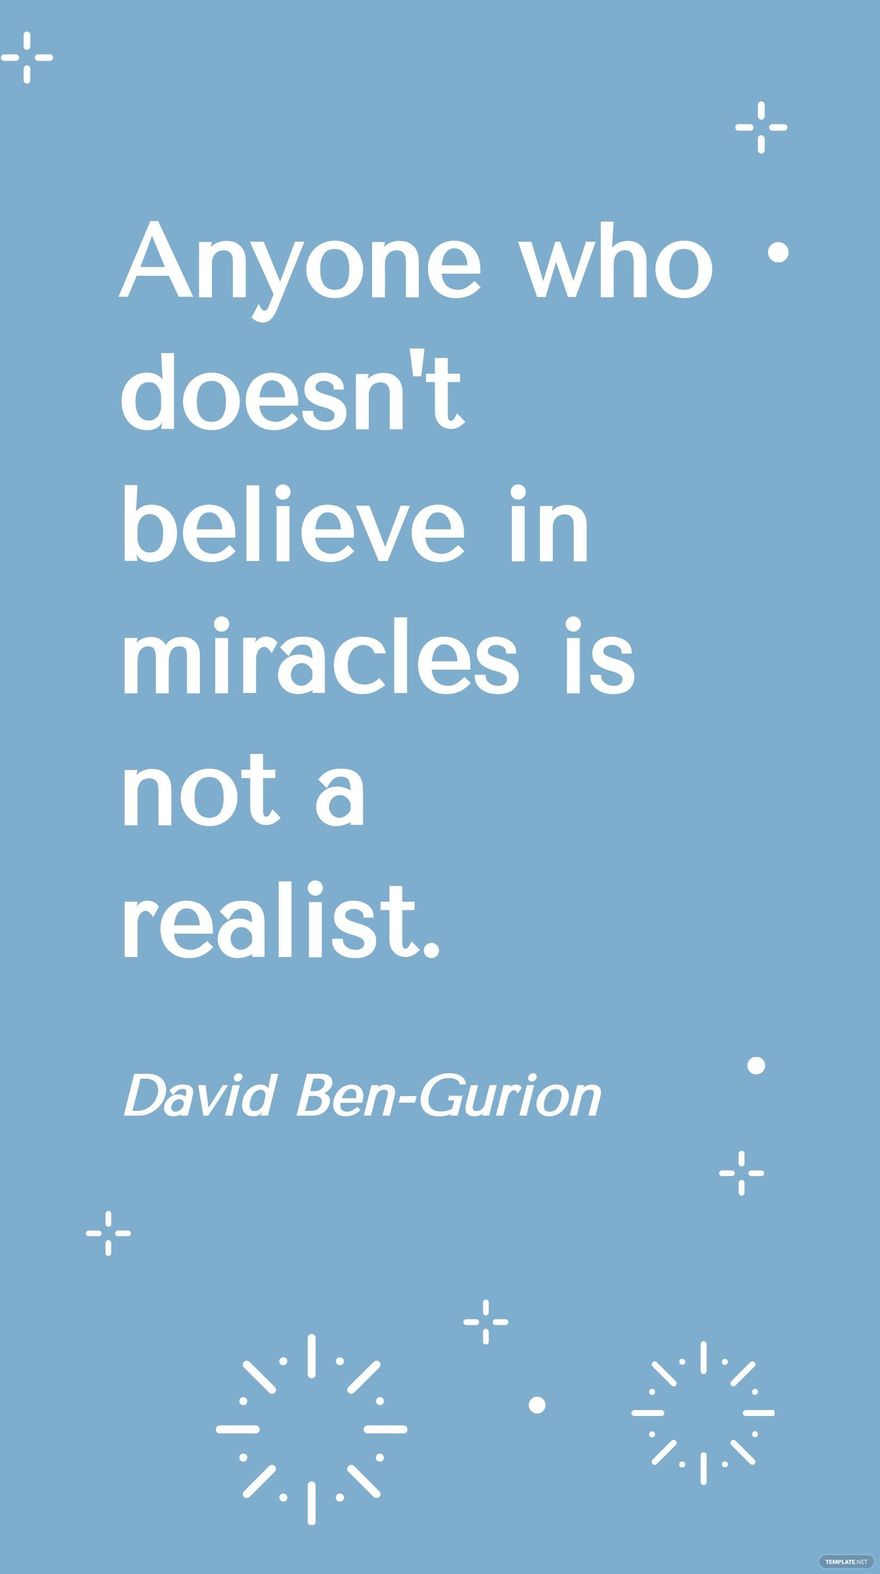 Free David Ben-Gurion - Anyone who doesn't believe in miracles is not a realist.